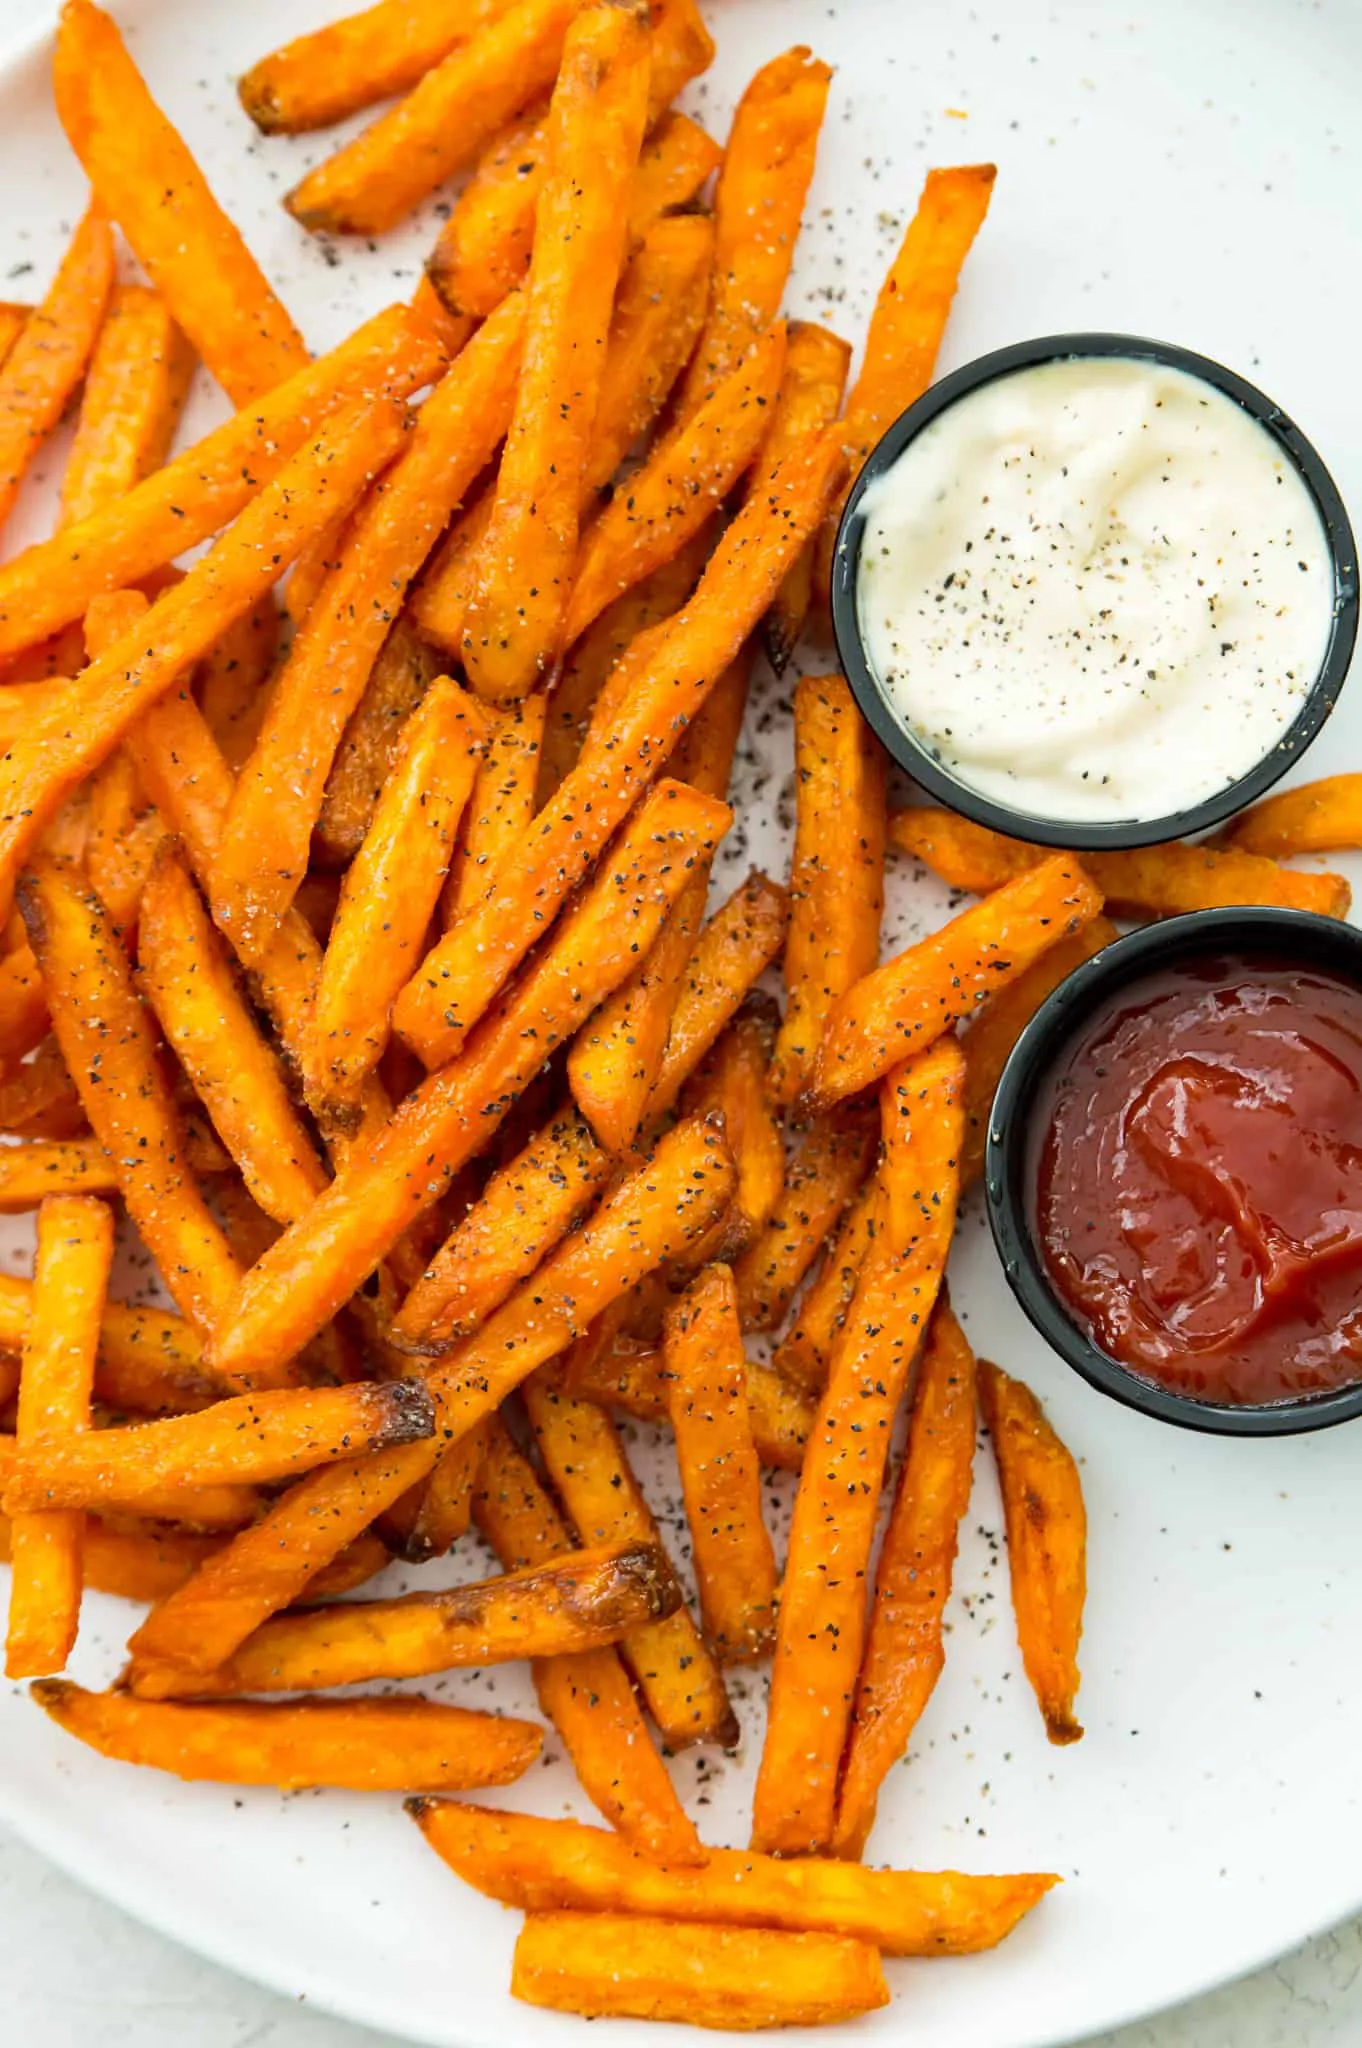 A plate of cooked sweet potato fries with ketchup and aioli on the side